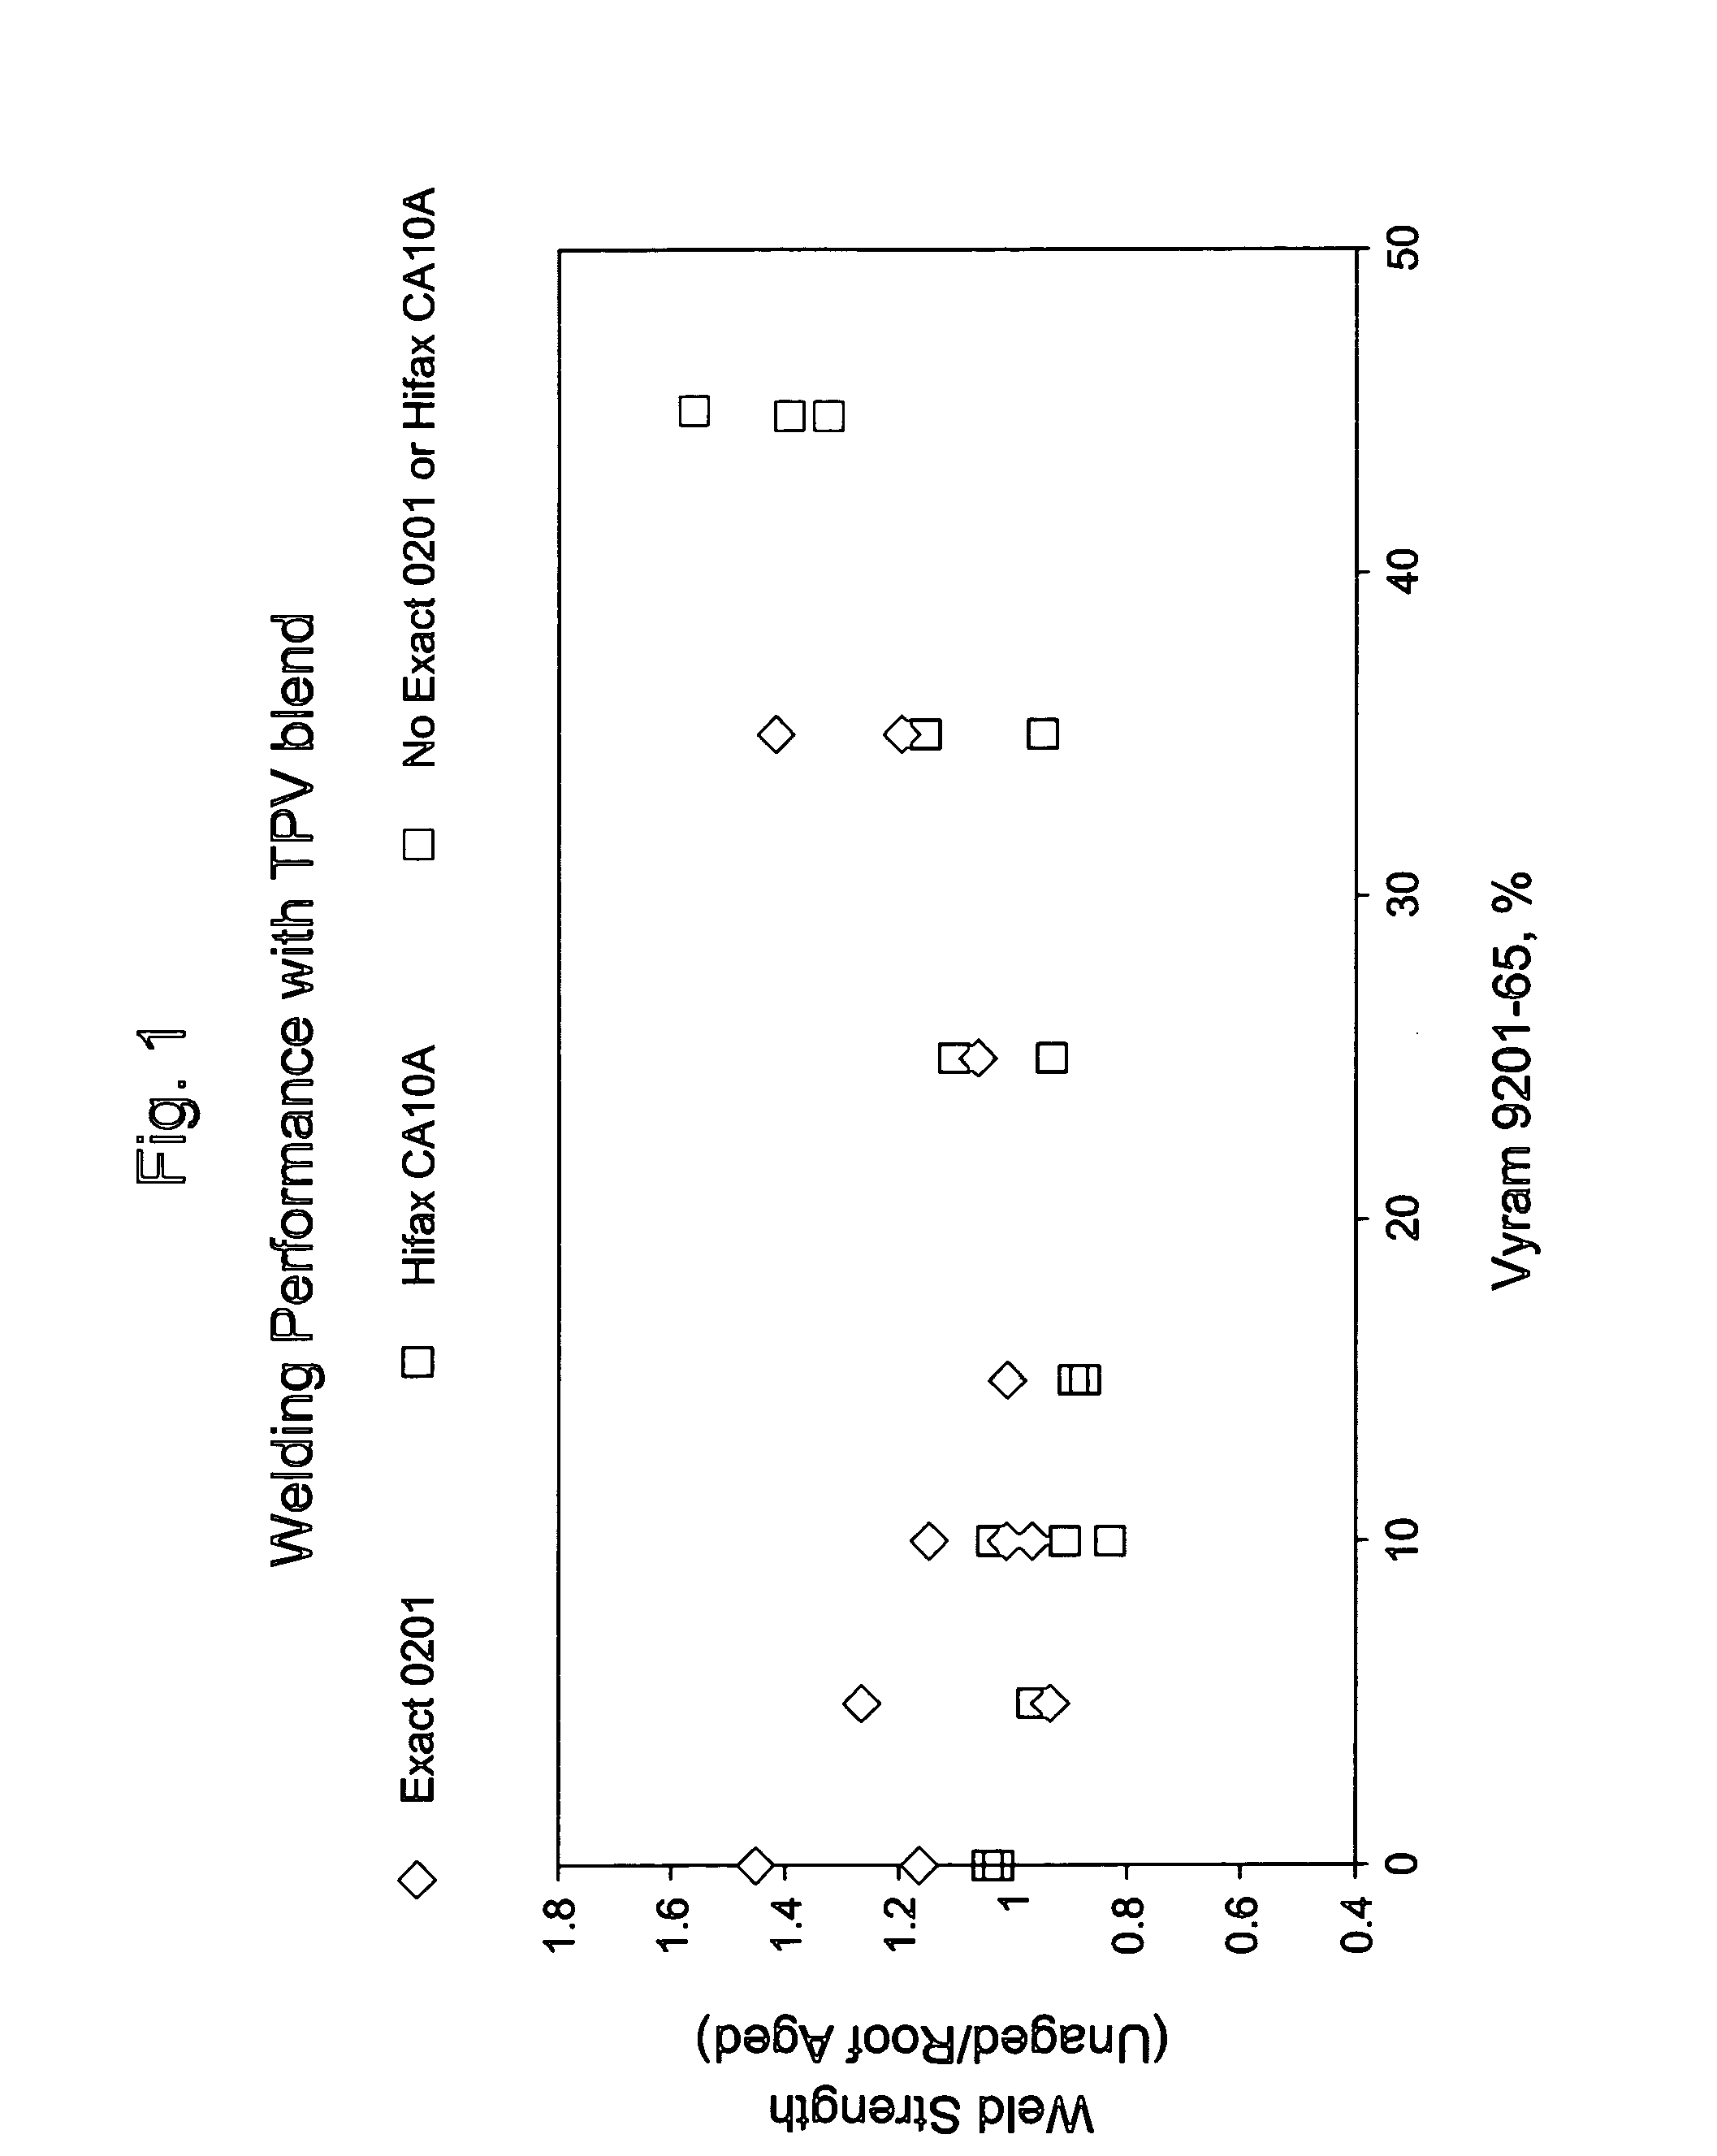 Weldable thermoplastic sheet compositions